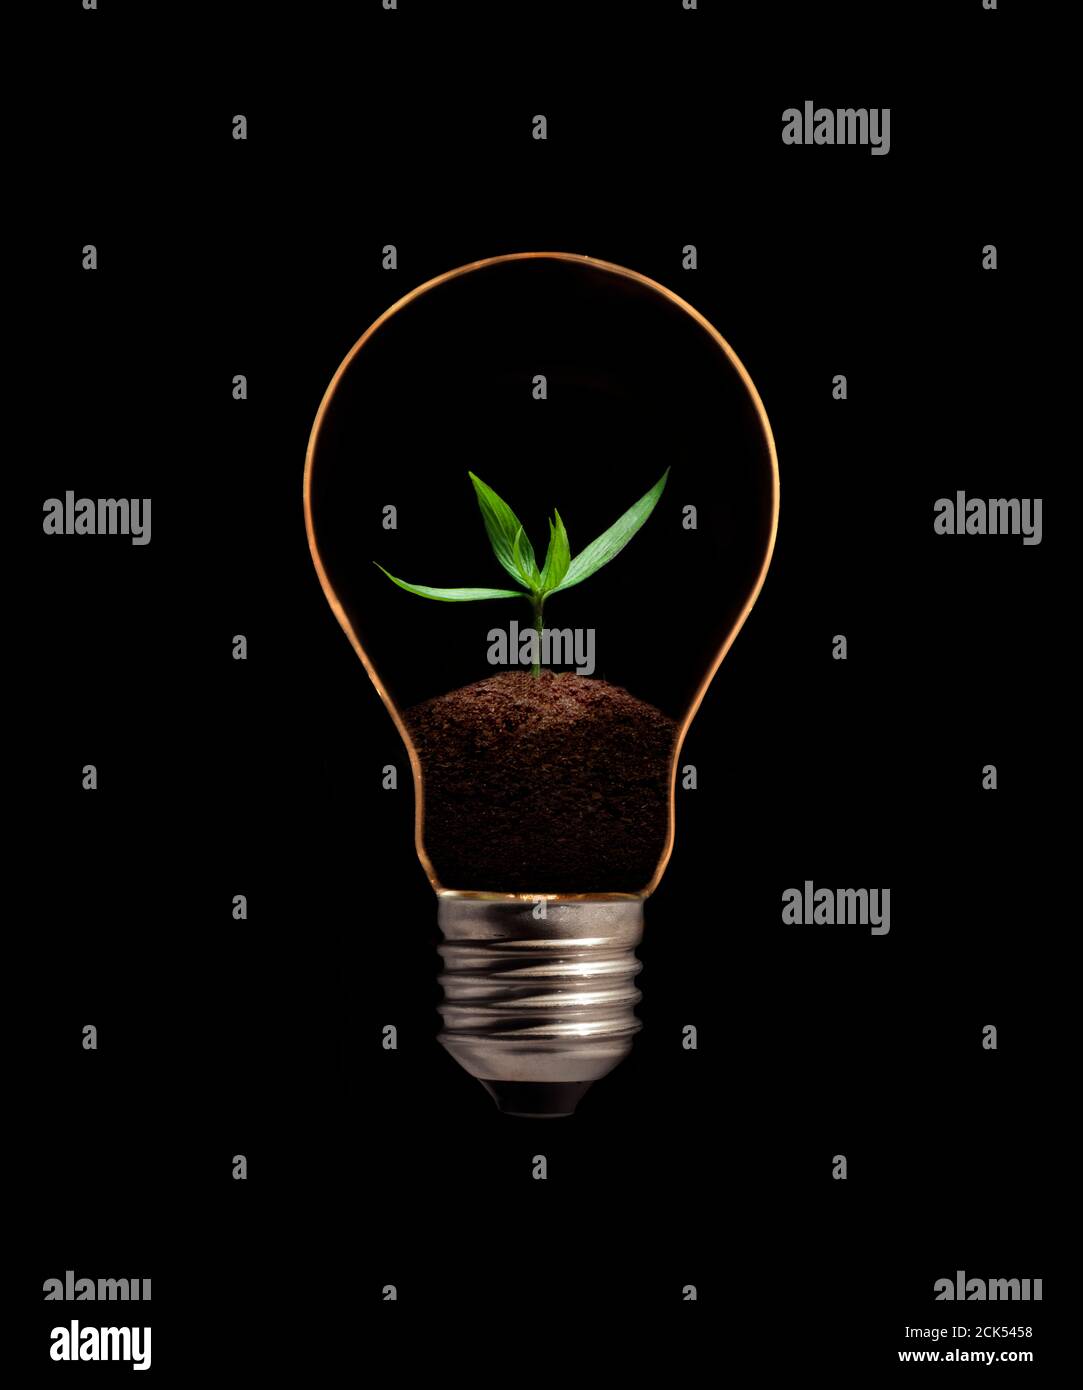 A light bulb with fresh green leaves inside, isolated on black background. Stock Photo